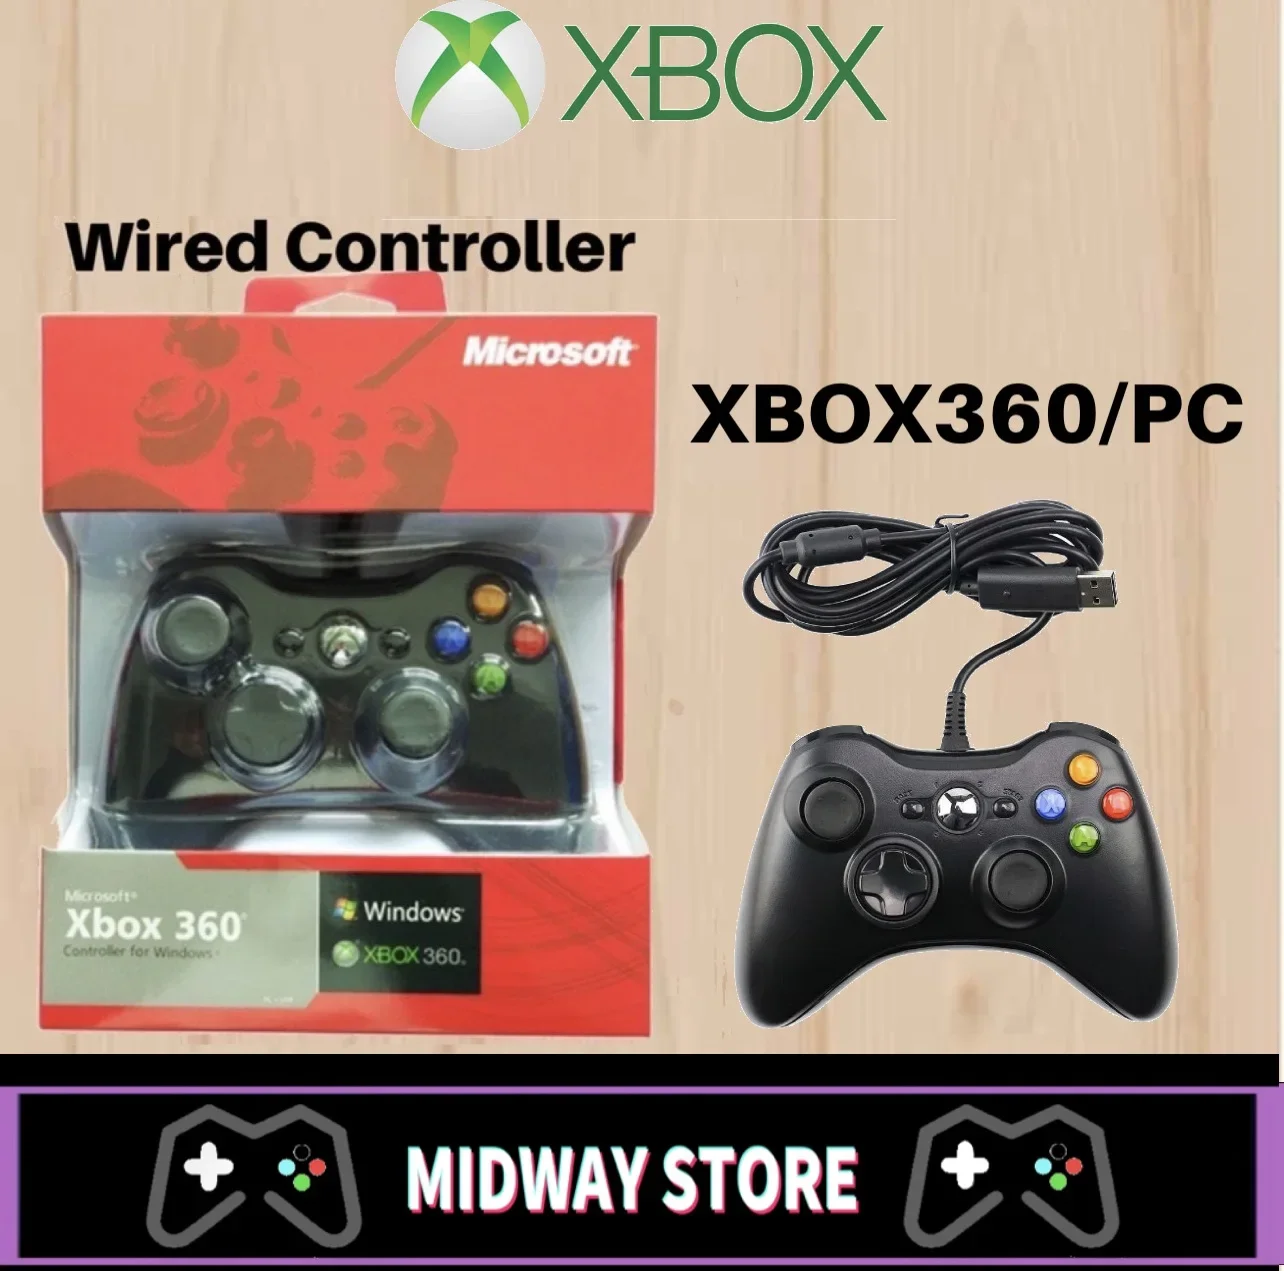 Microsoft Xbox 360 Controller /PC USB Wired Controller Gamepad